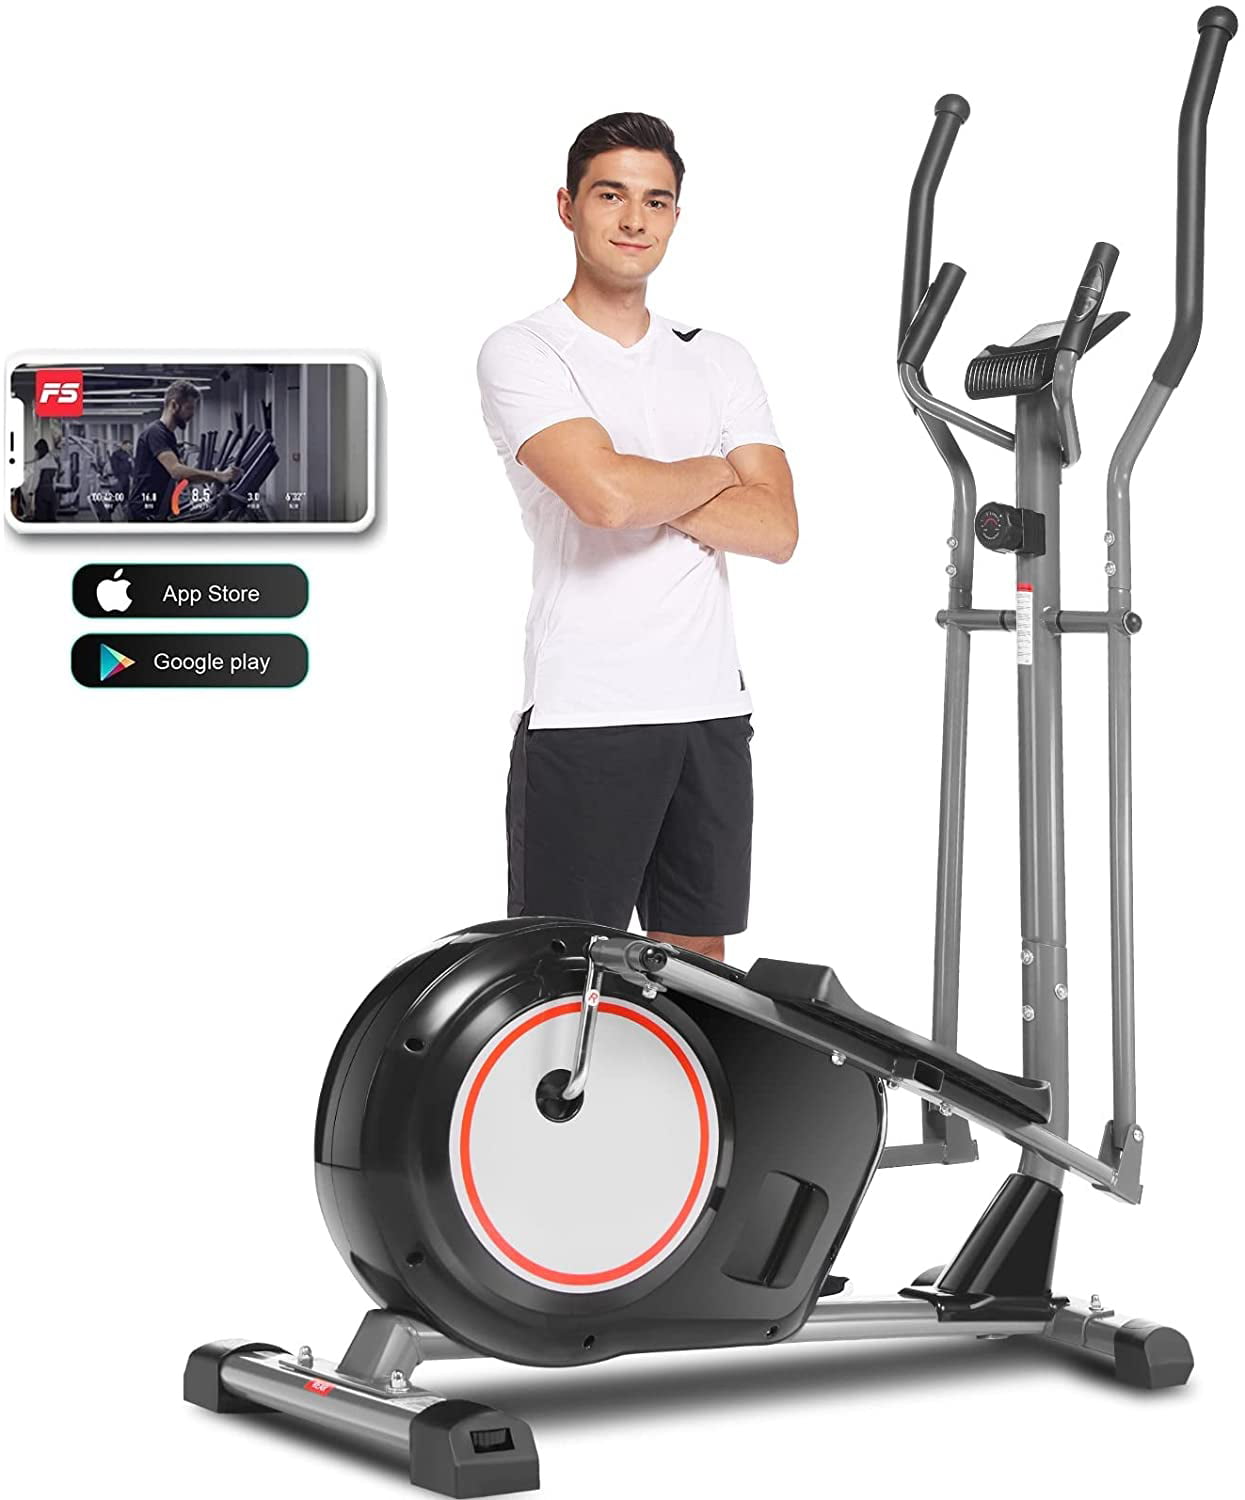 ANCHEER Elliptical Machine 390lbs Weight Capacity Exercise Machine for Home Office Cardio Training APP Connect Elliptical Trainer with 10 Level Magnetic Resistance Multi-Functional Display 